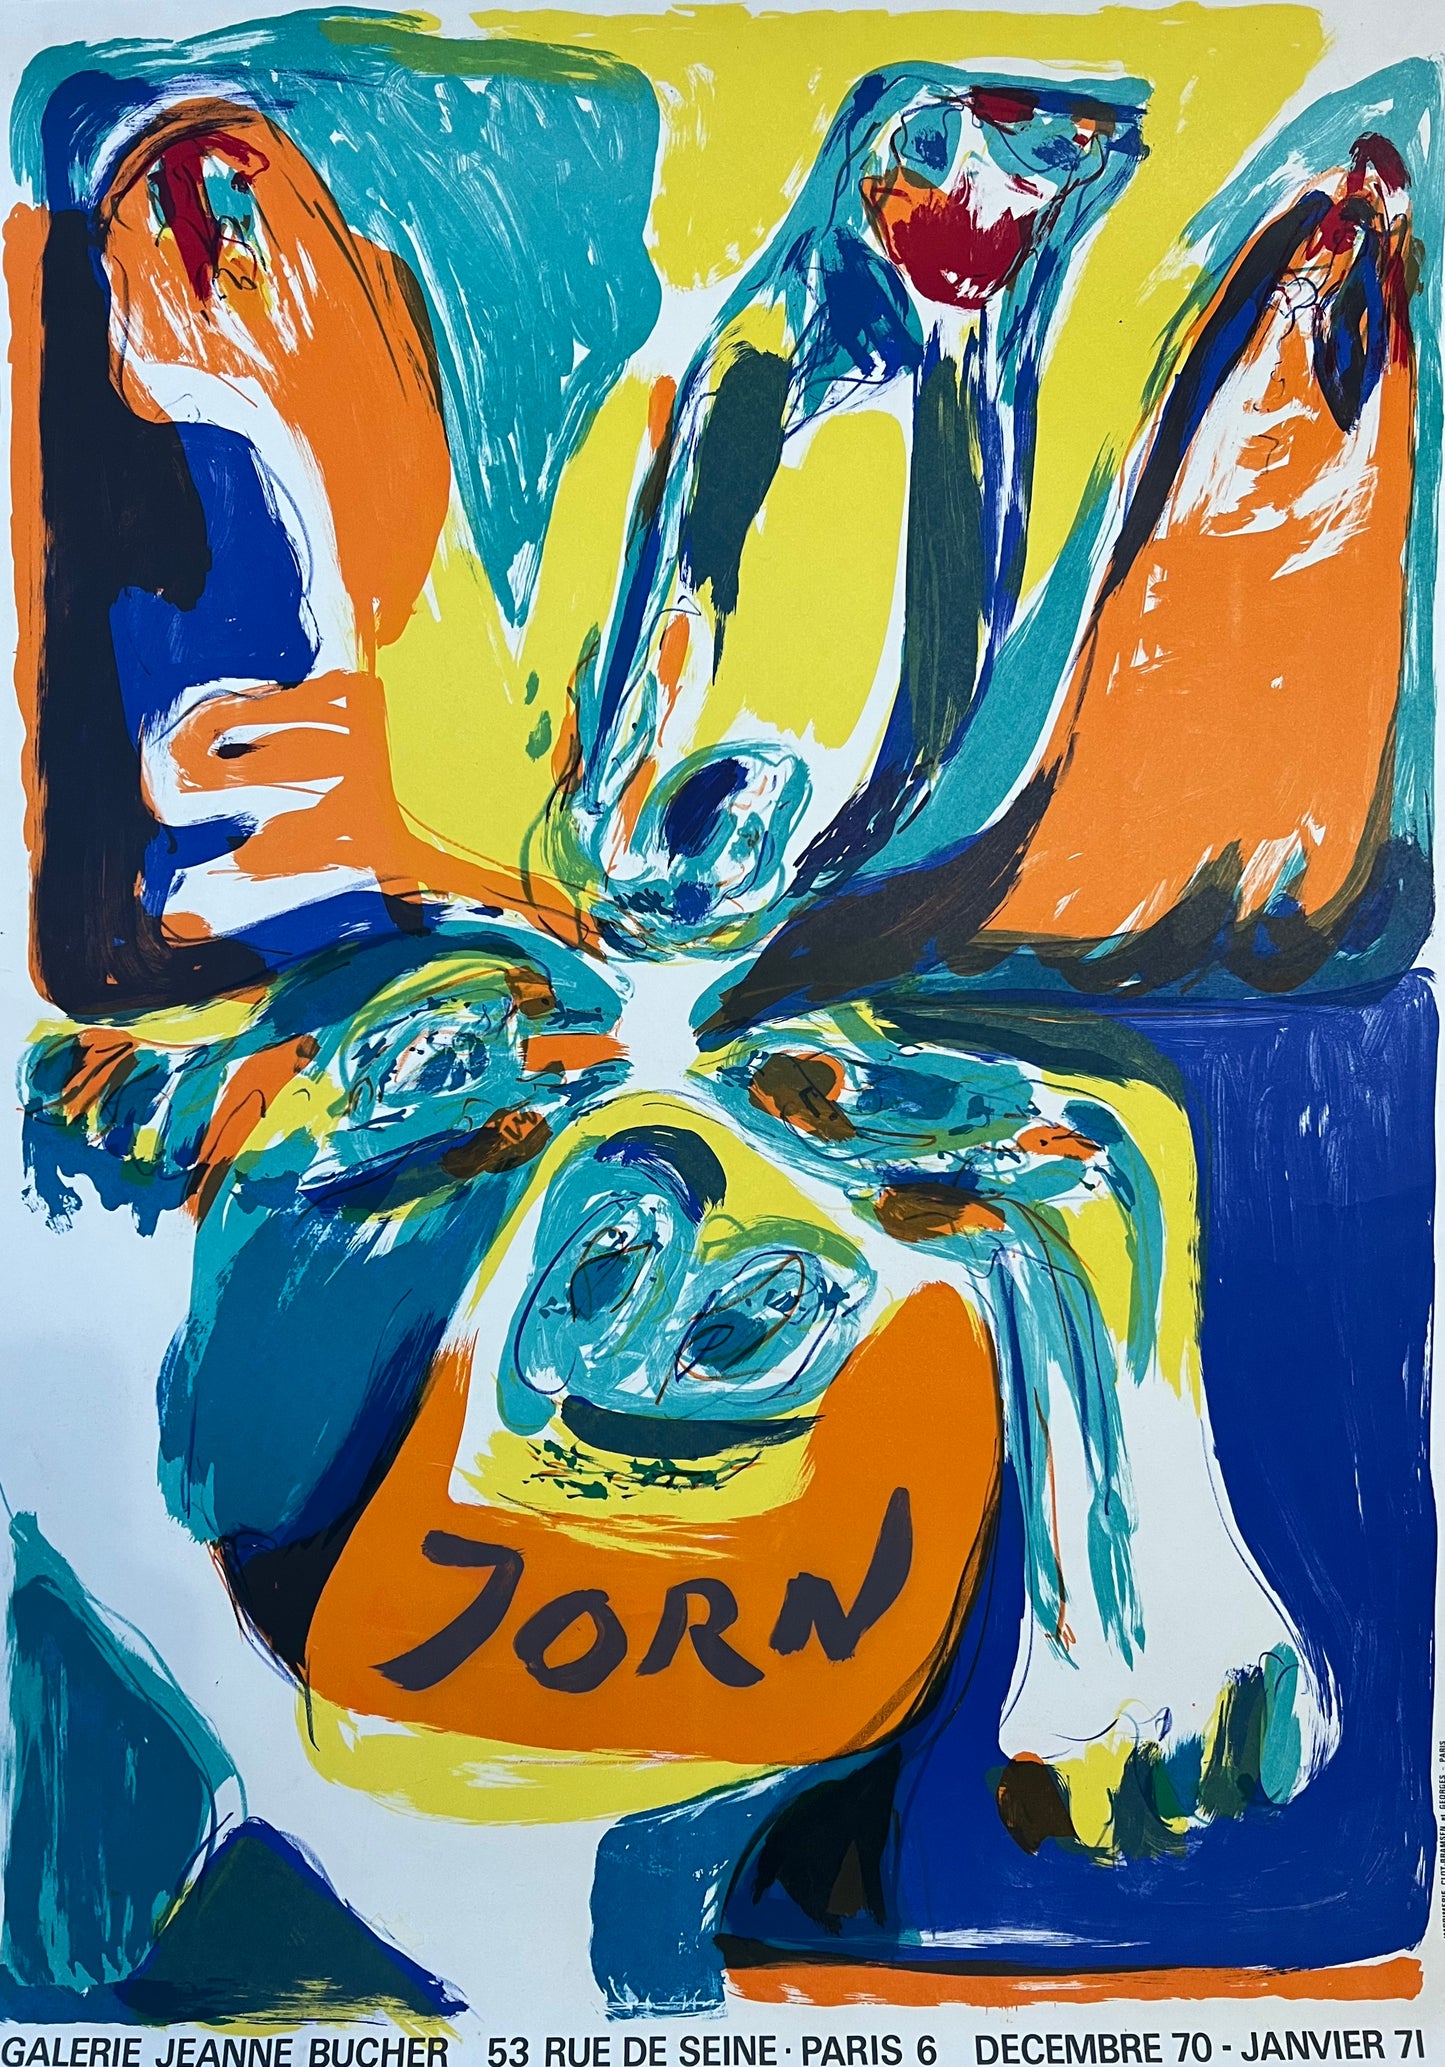 Asger Jorn. Exhibition posters, 1970